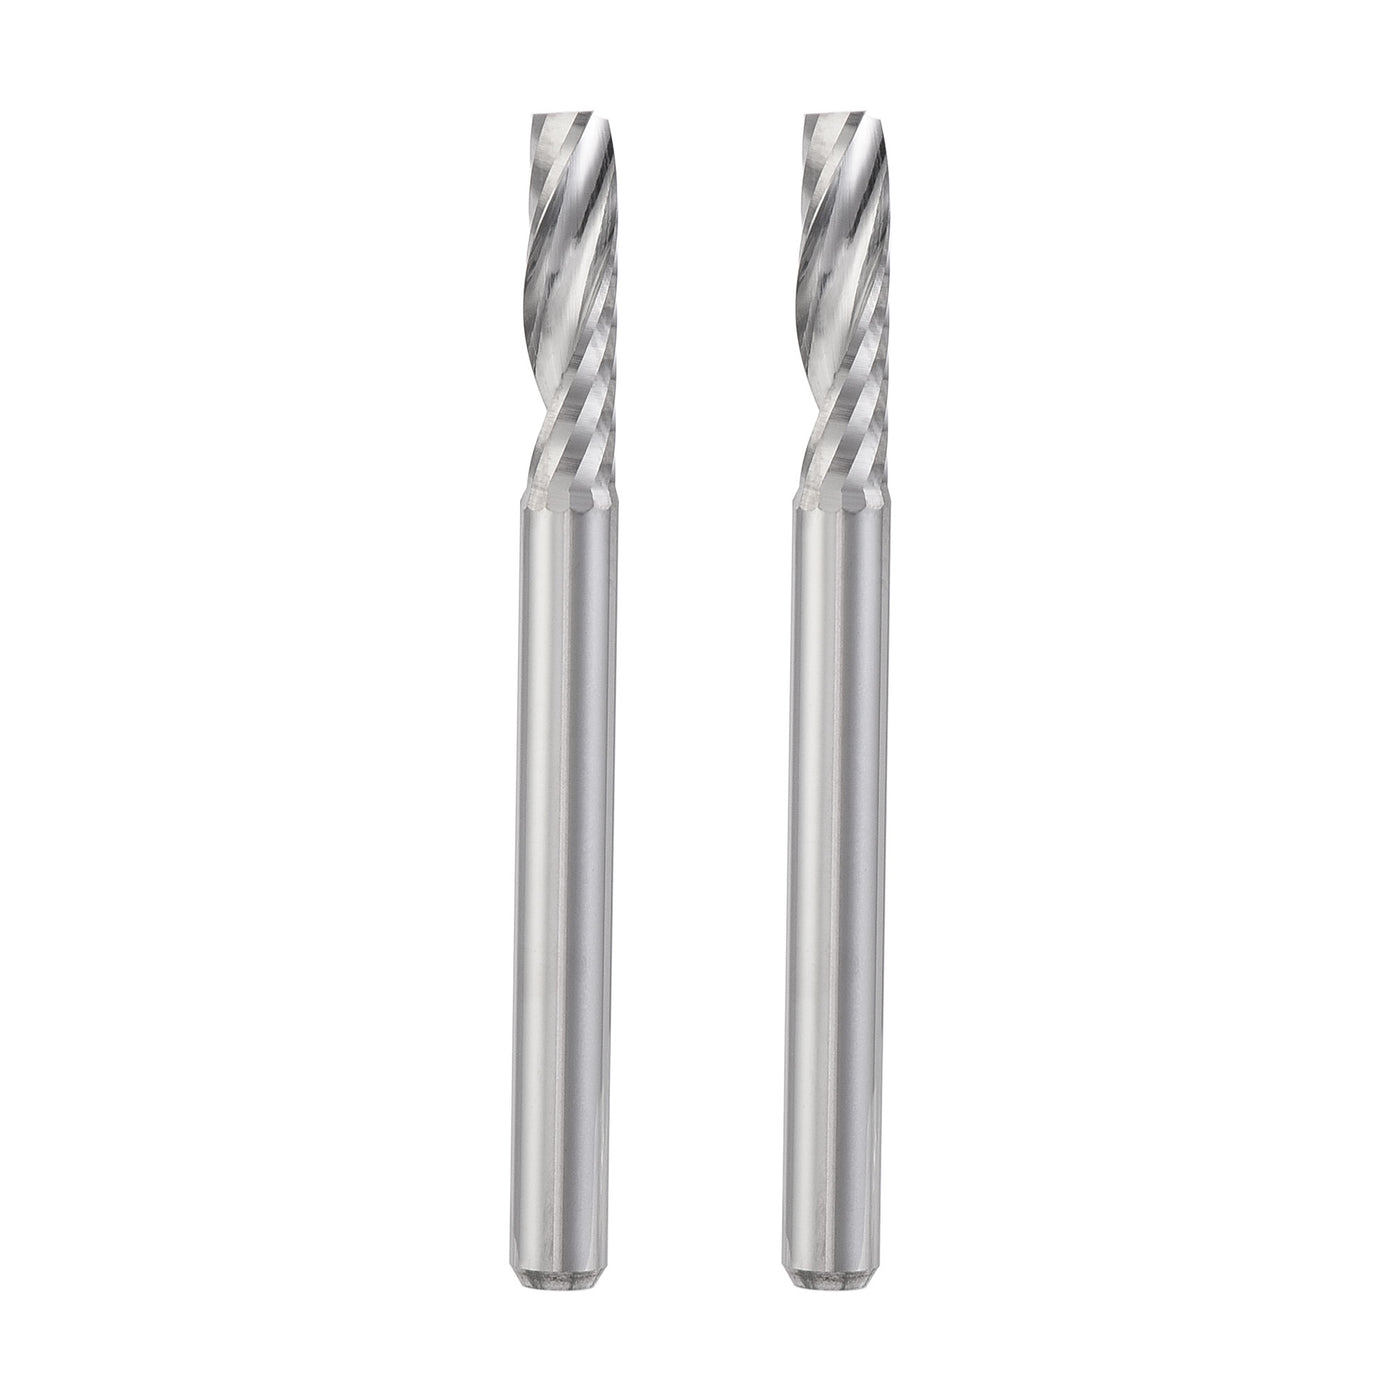 uxcell Uxcell 1/8" Shank 1.5mmx8mm Carbide Single Flute Spiral Router Bit for PVC Wood 2pcs